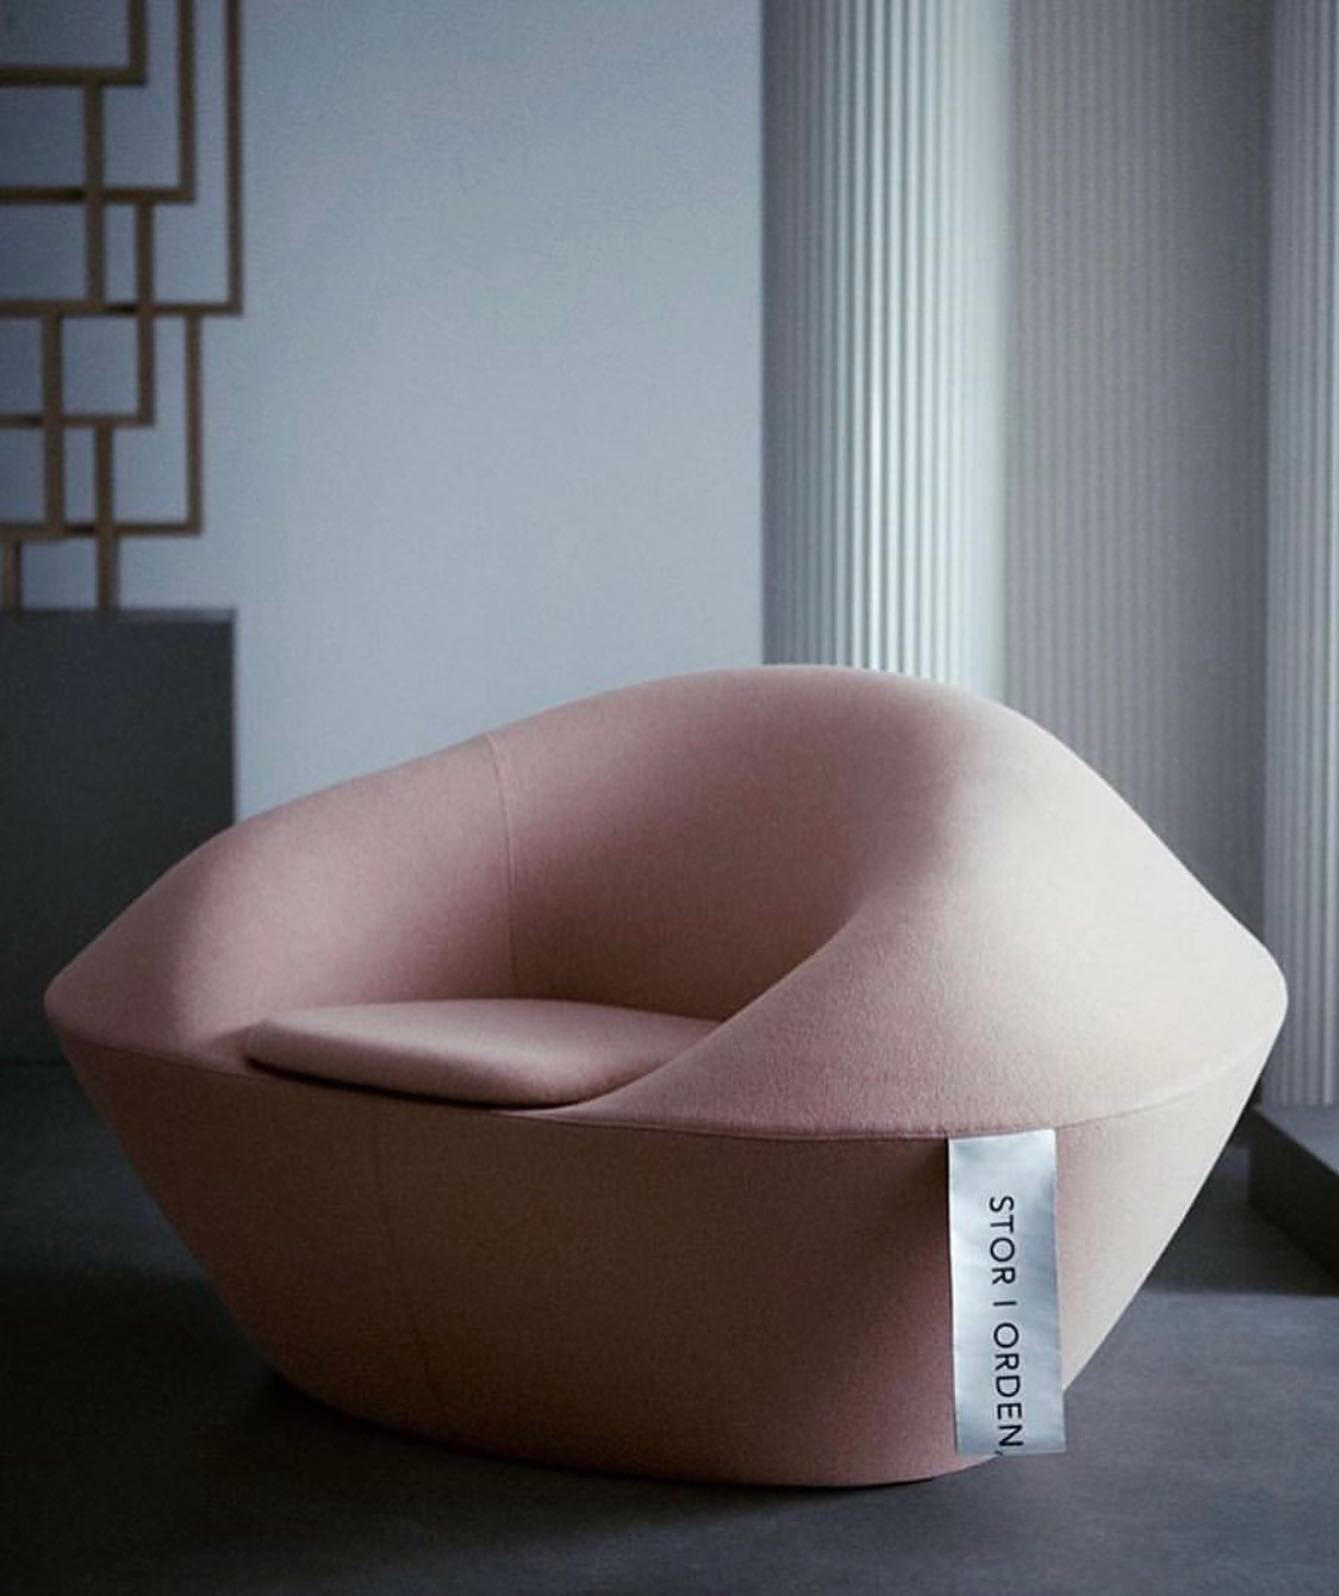 image  1 Product.Only - Fortuna by Hanna Stenström and Jennie Adén⁣•⁣•⁣•#Product_Only #architecture #decor #f